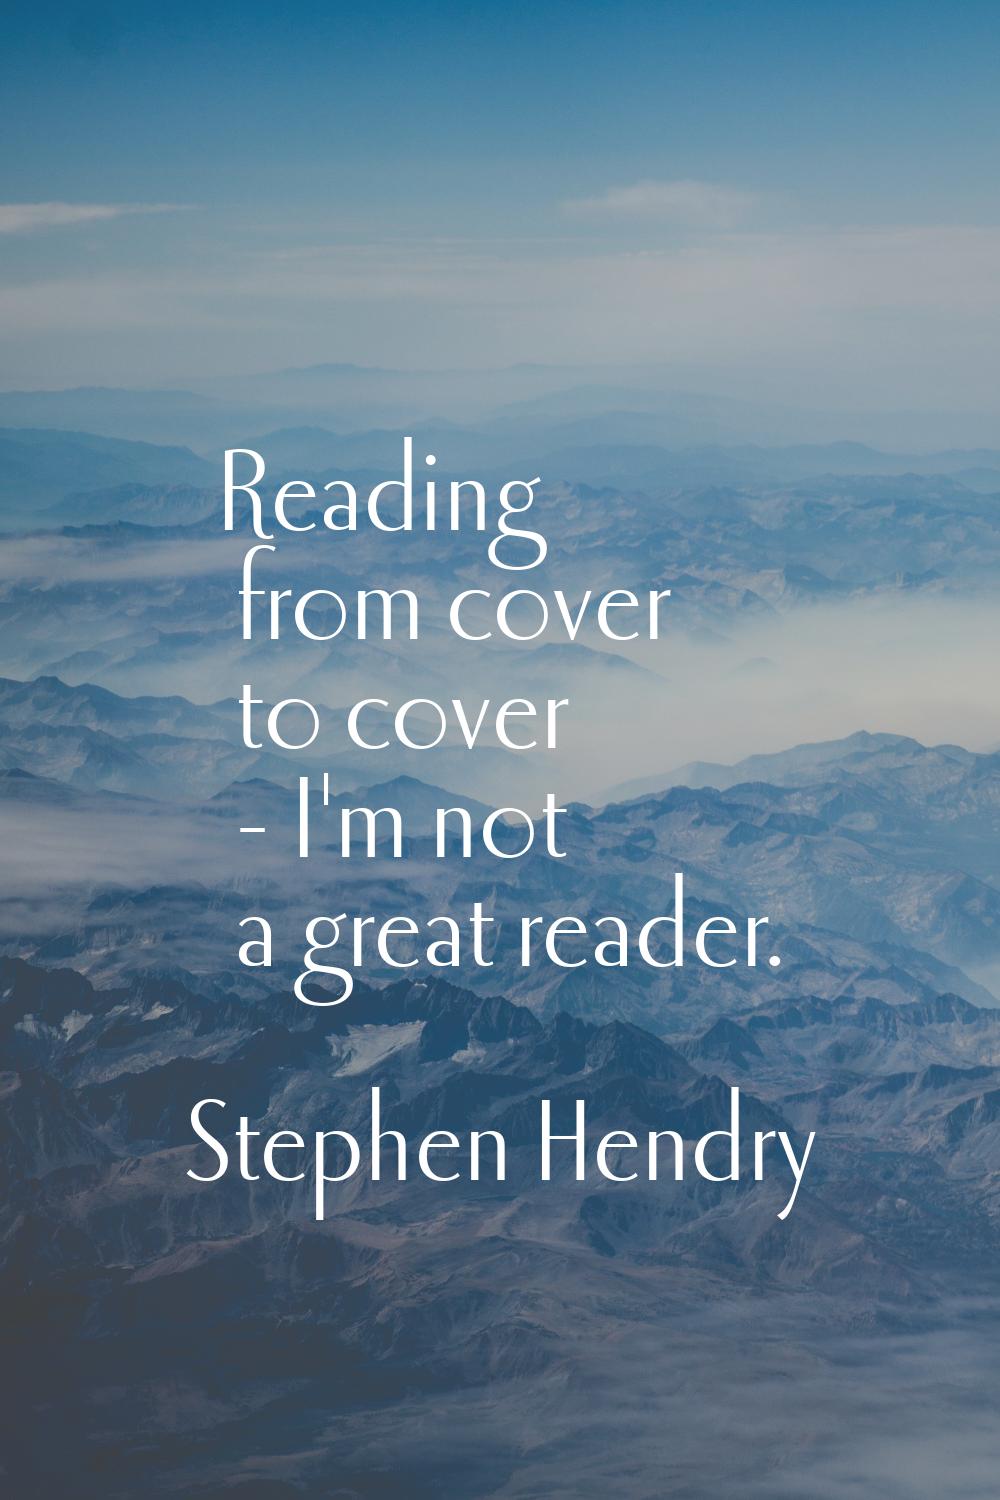 Reading from cover to cover - I'm not a great reader.